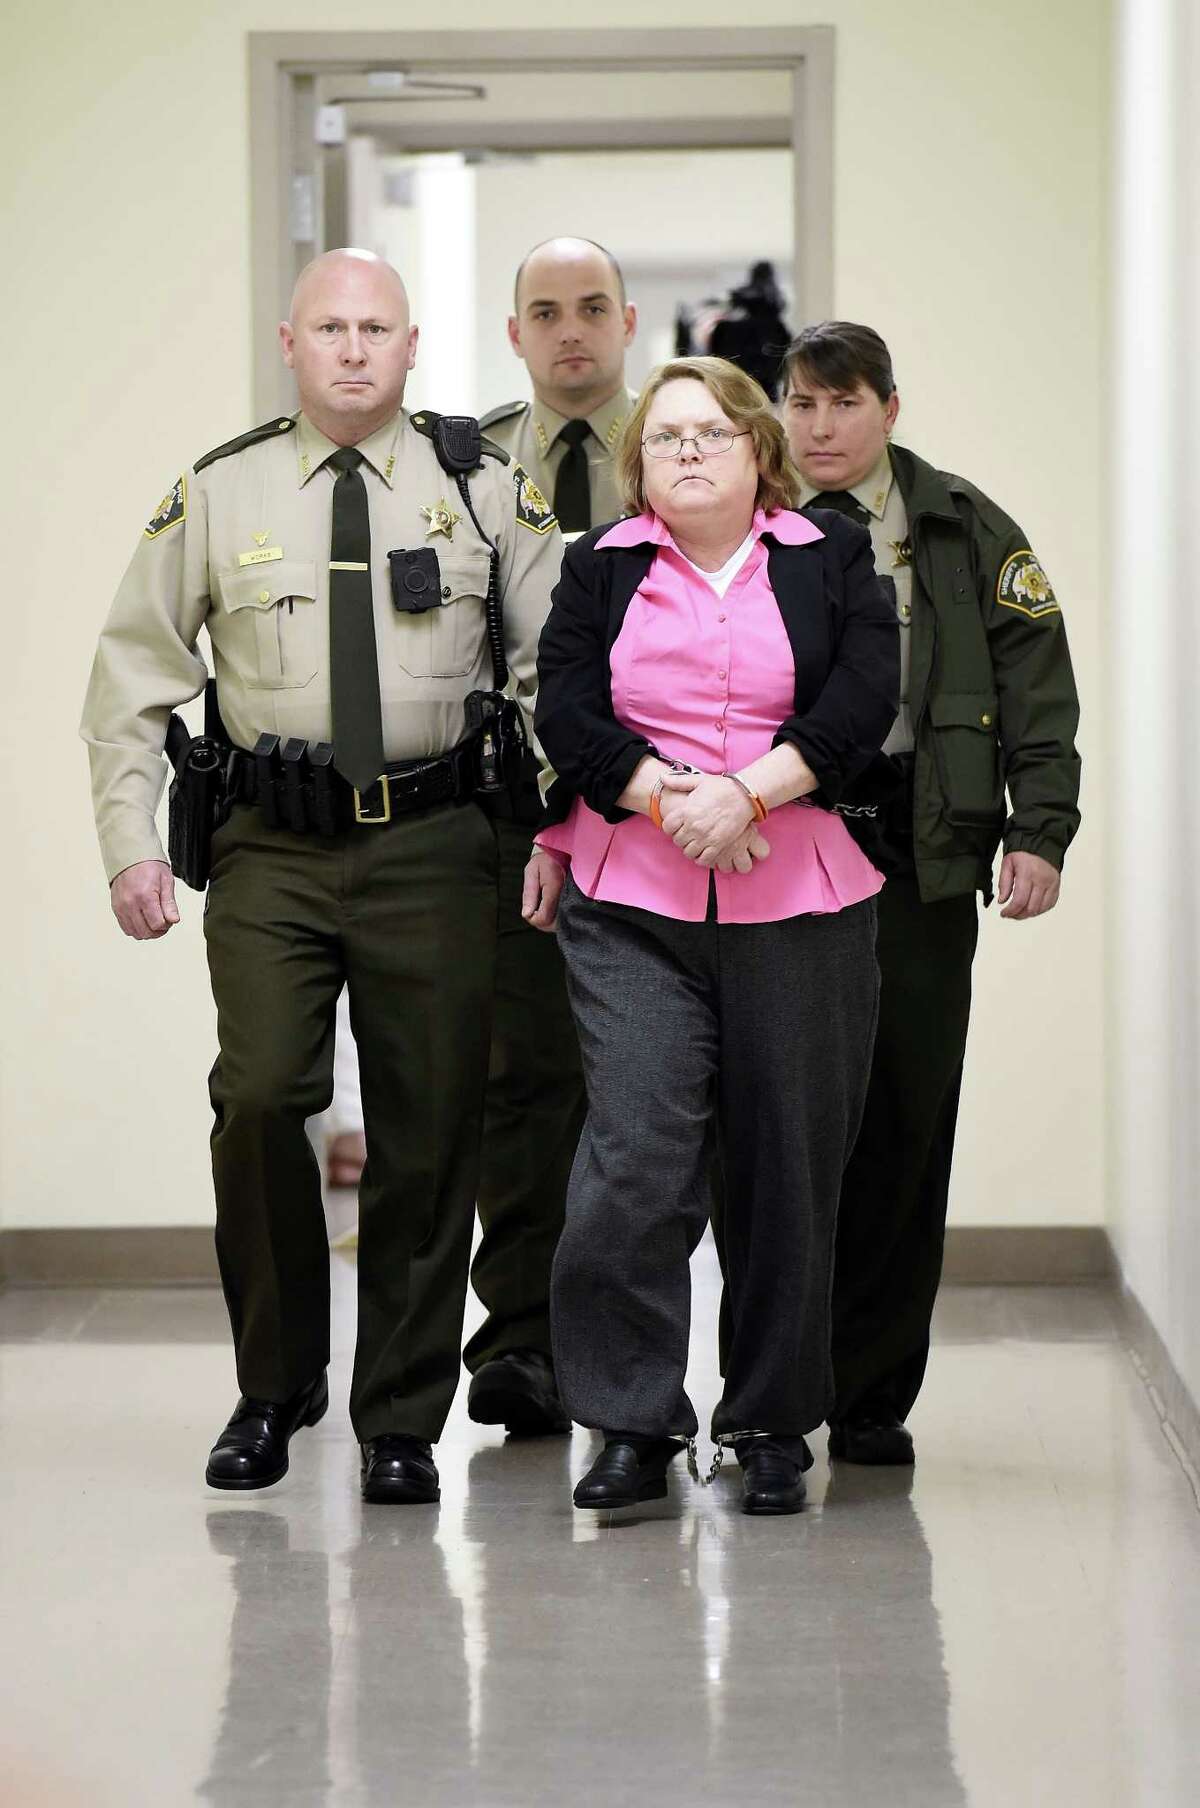 Joyce Hardin Garrard is led back to the Etowah County Detention Center in Gadsden, Ala. on Thursday, March 26, 2015, after a jury recommended she be sentenced to life in prison following her capital murder conviction. Circuit Judge Billy Ogletree will sentence Garrard on May 11 for the death of 9-year-old granddaughter, Savannah Hardin. (AP Photo/Gadsden Times, Eric T. Wright)